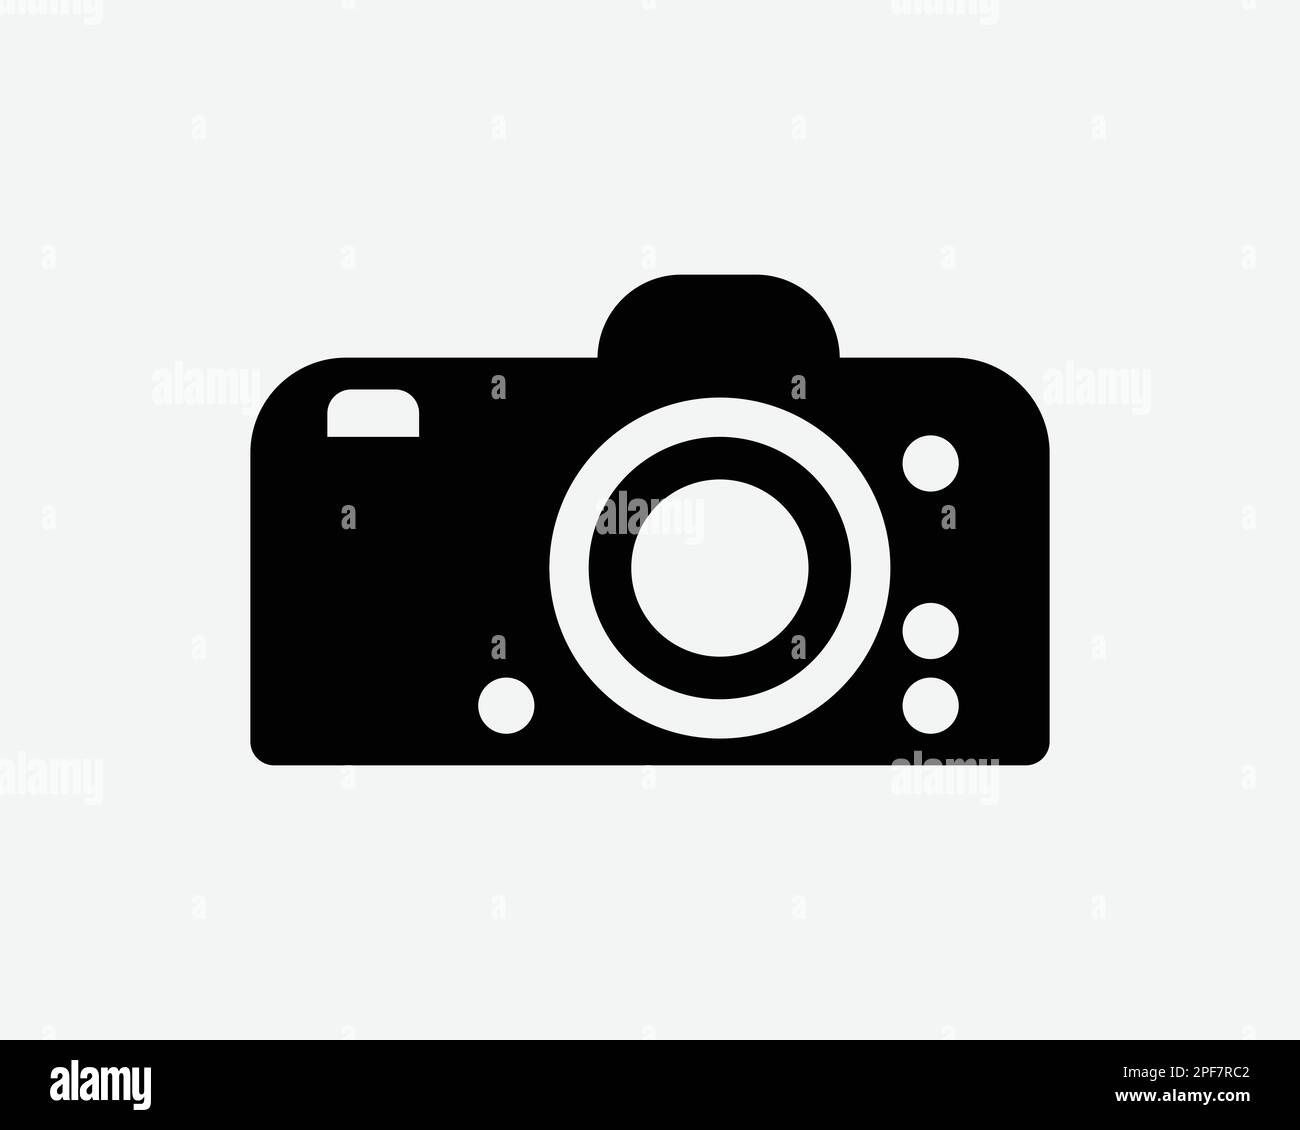 Camera Icon Photography Photograph Photo Image Picture Gallery Vector Black White Silhouette Symbol Sign Graphic Clipart Artwork Illustration Pictogra Stock Vector